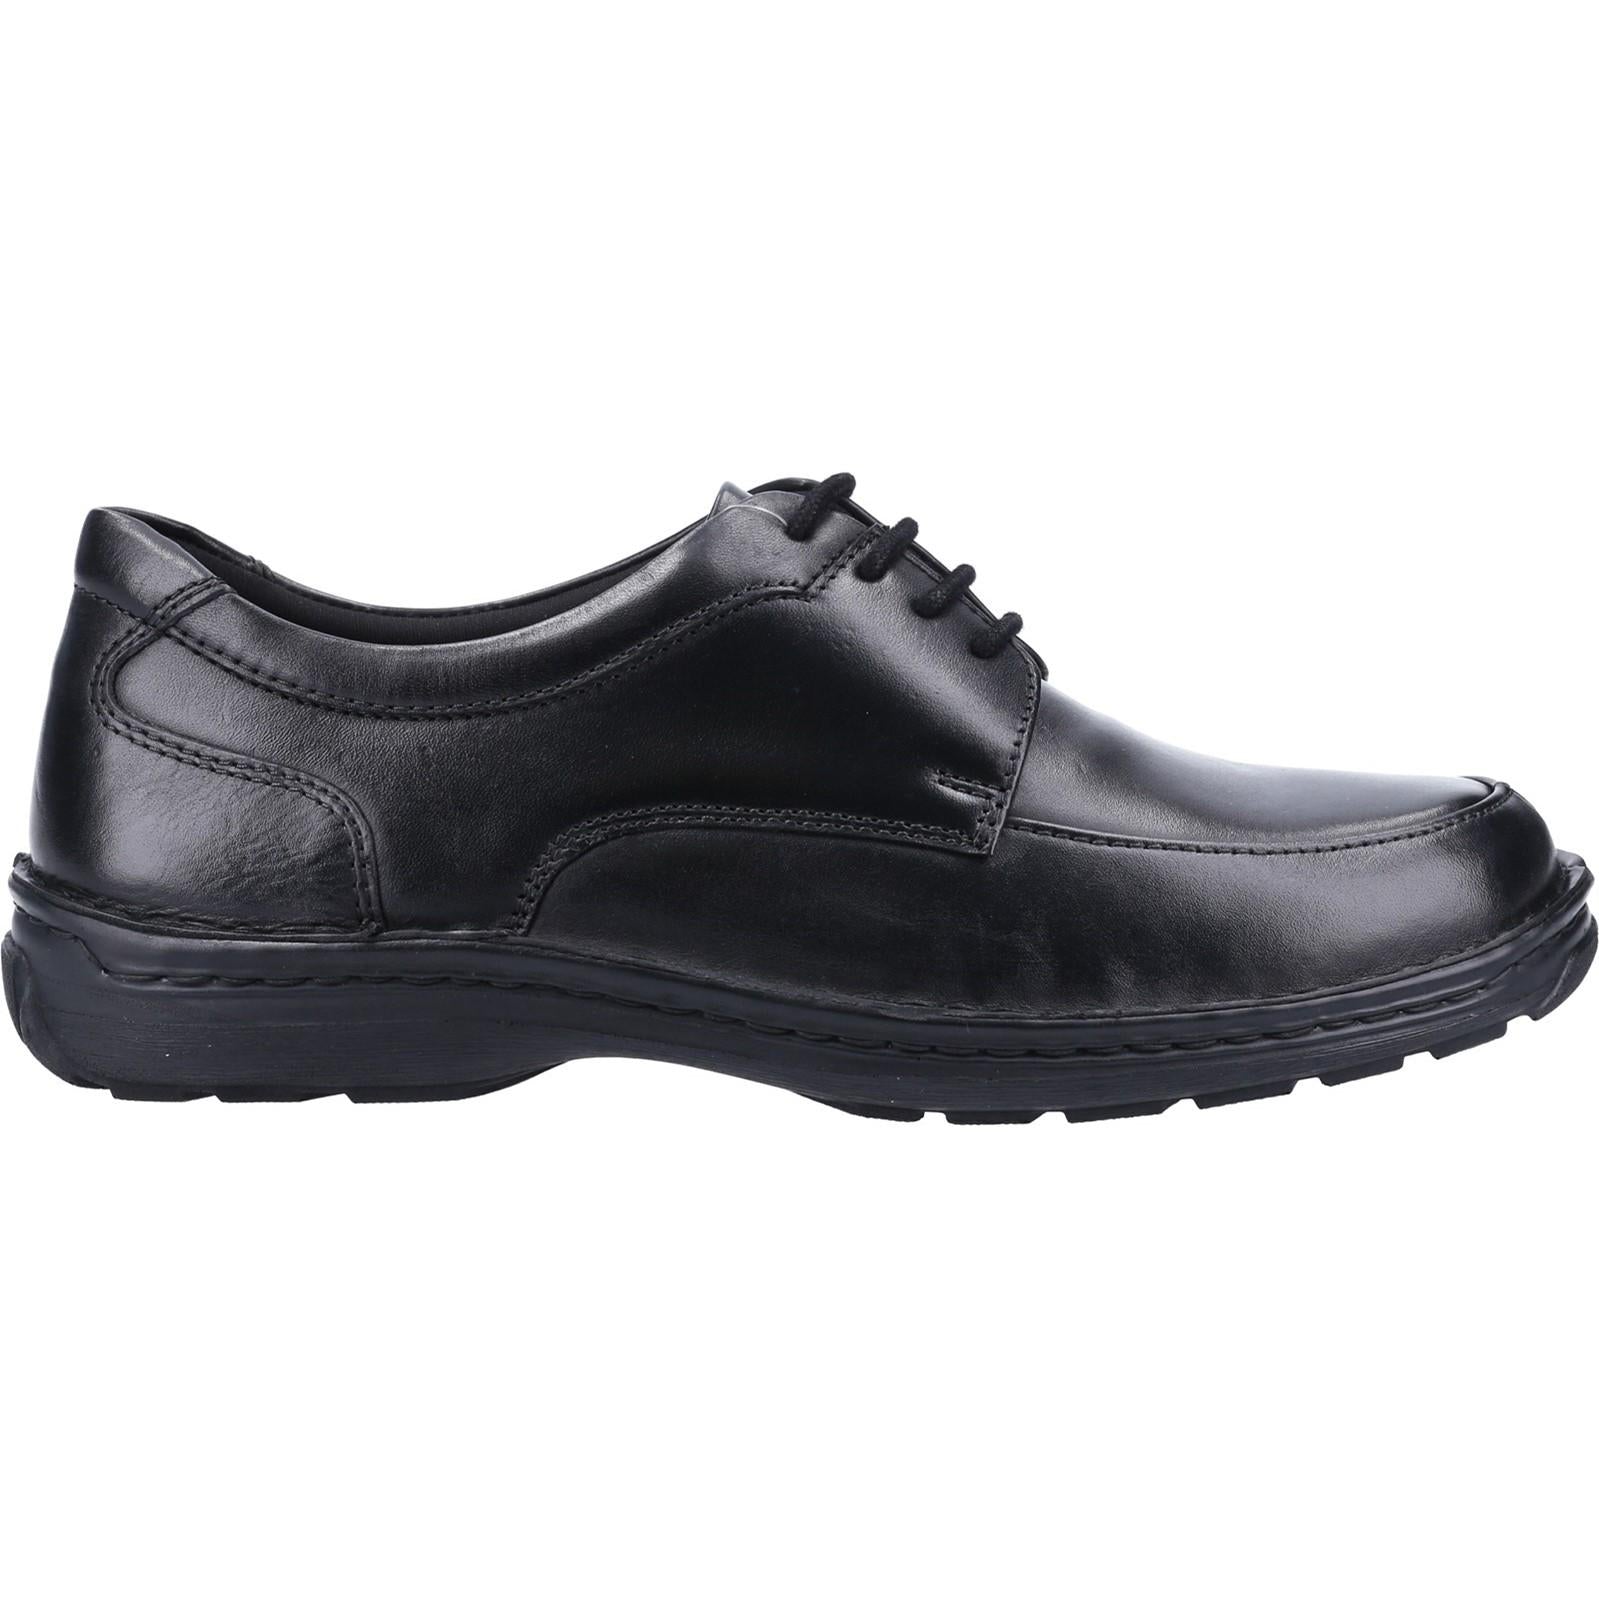 Hush Puppies Curtis Apron Lace Up Shoe